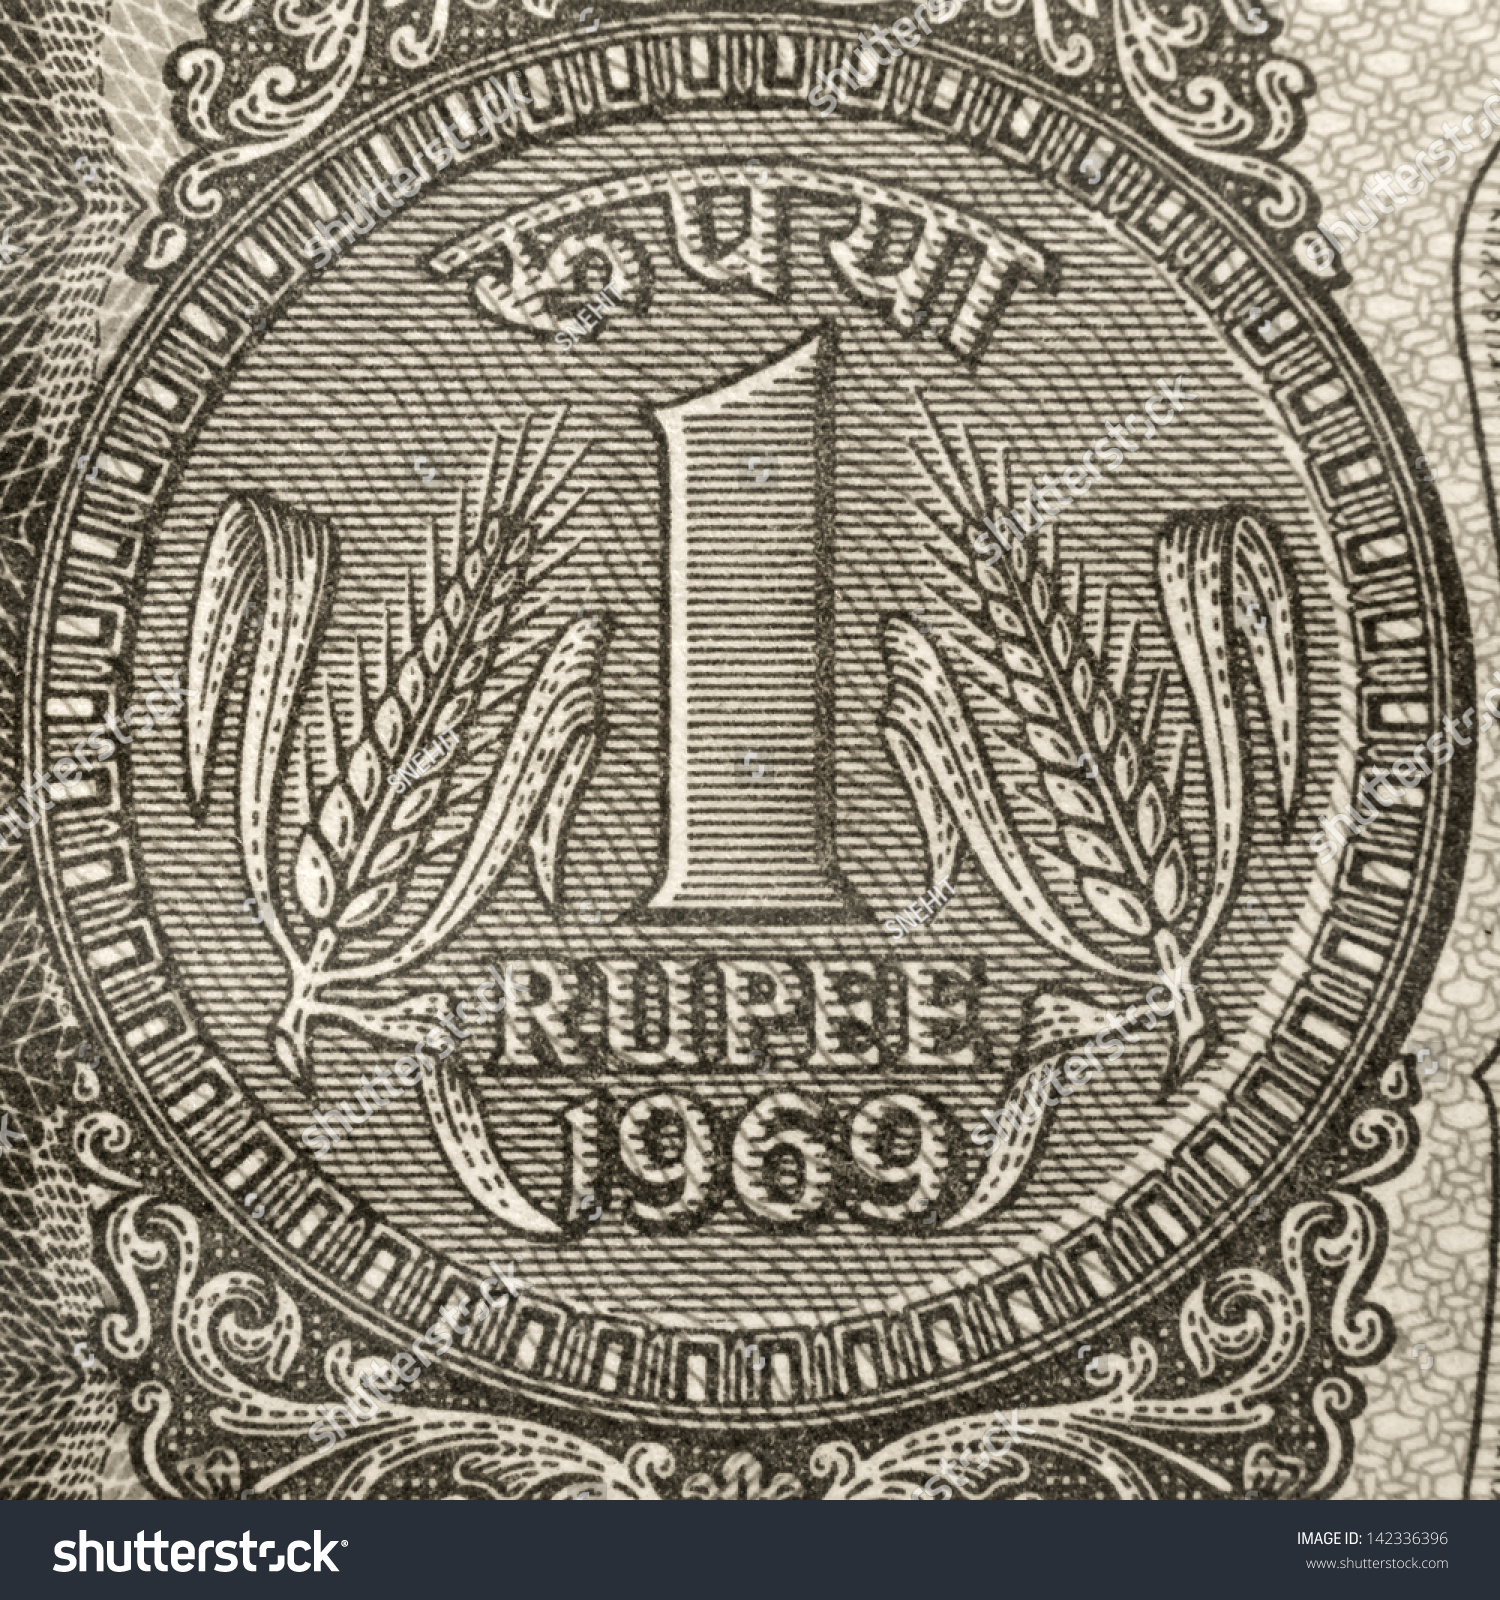 One Rupee Coin Symbol On The Note Stock Photo 142336396 ...